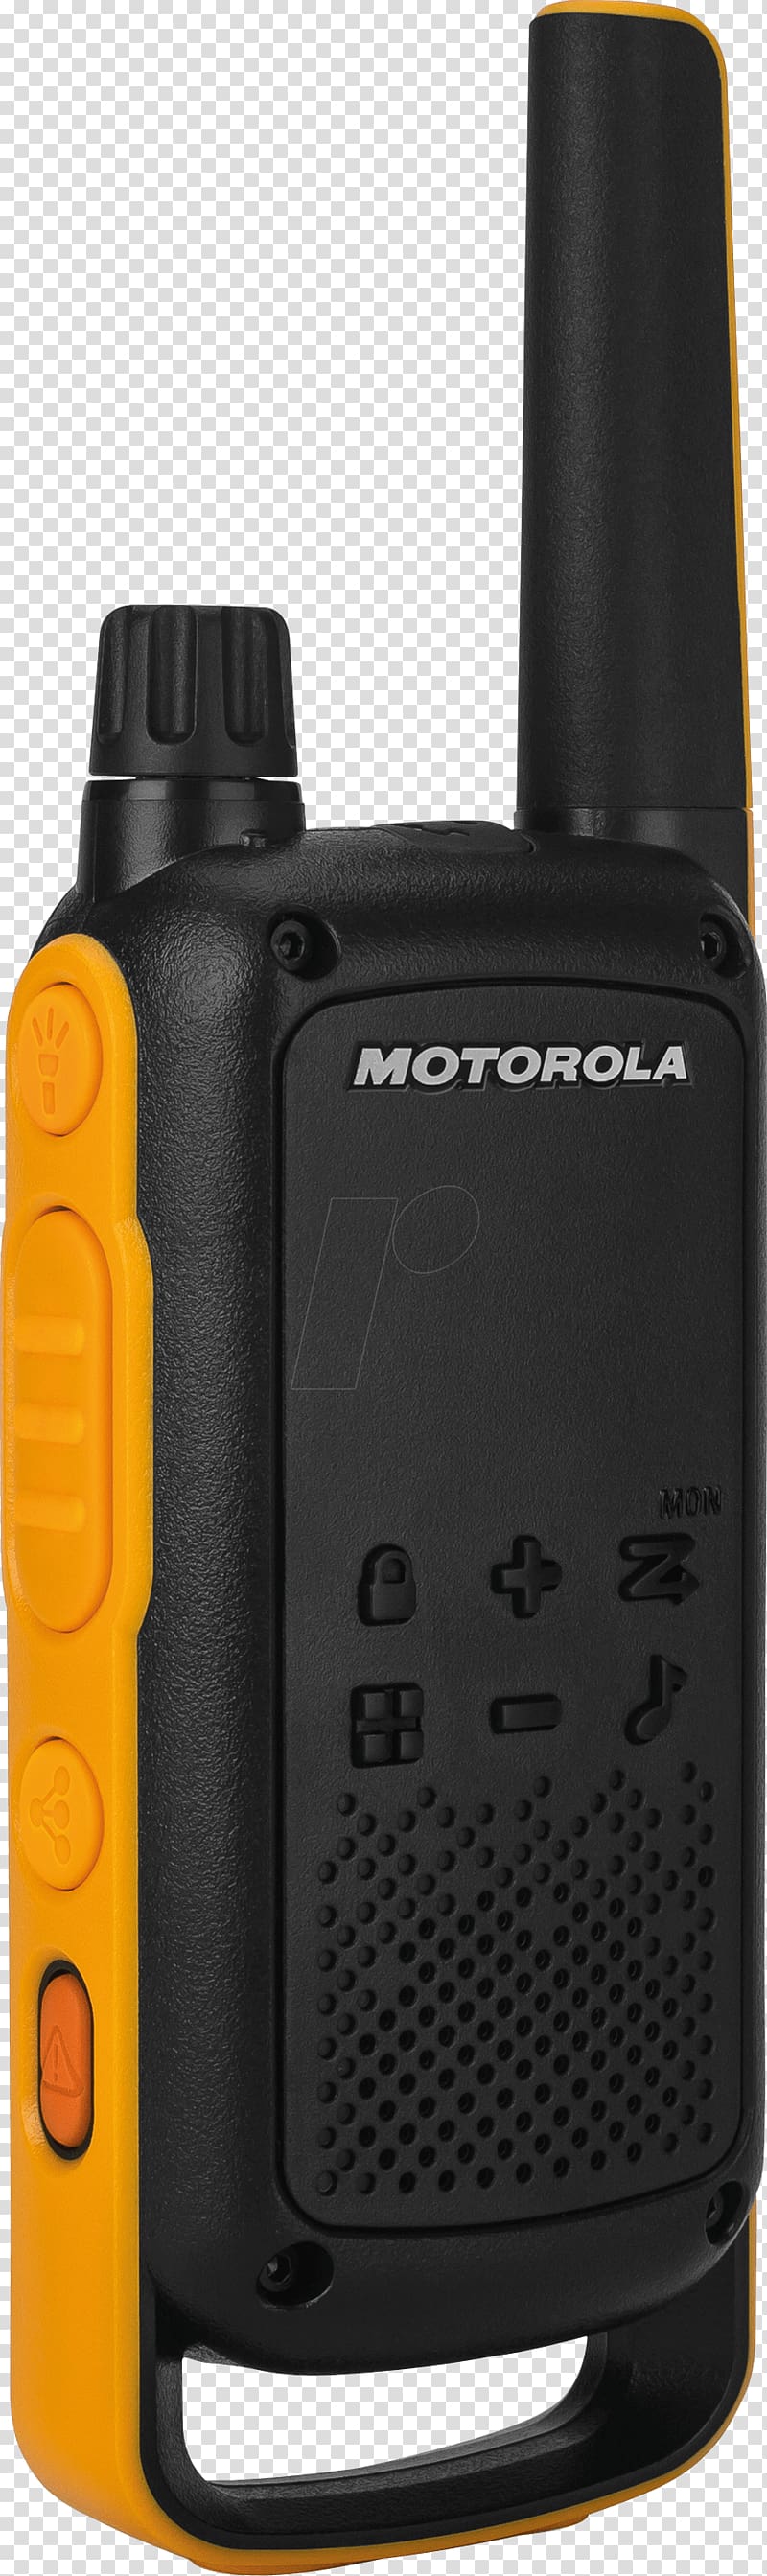 Motorola Talkabout T82 Extreme 188069 PMR446 Walkie-talkie Two-way radio Professional mobile radio, others transparent background PNG clipart